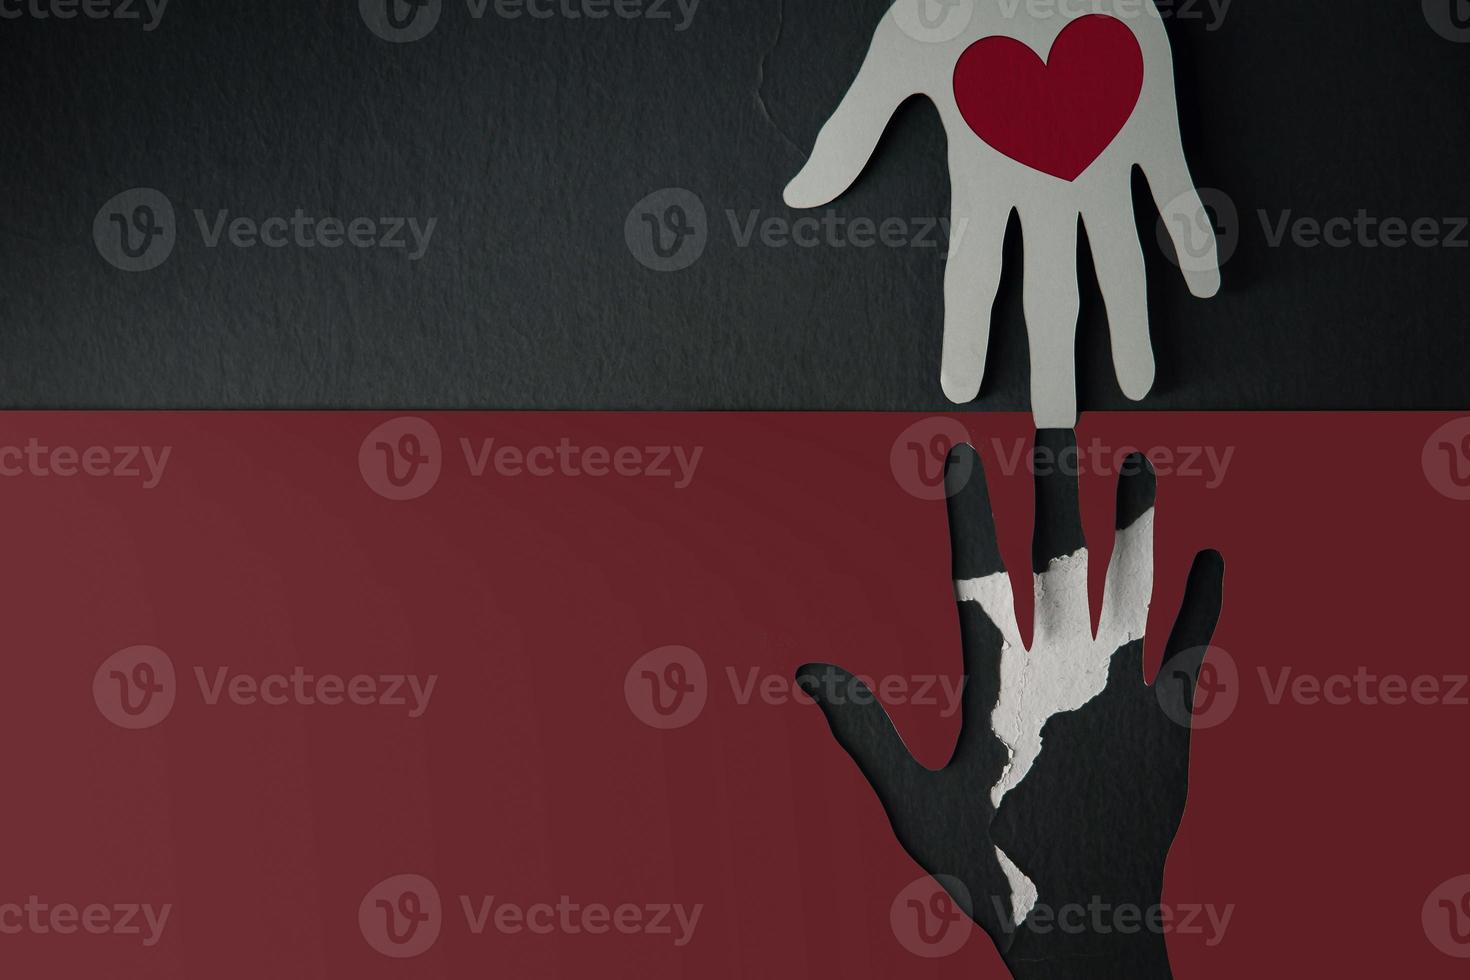 Donation Concept. Help, Care, Love, Support or Partnership. Paper Cut as Hands Shape hanging on the wall. look like the top one with a Red Heart trying to help the one below photo